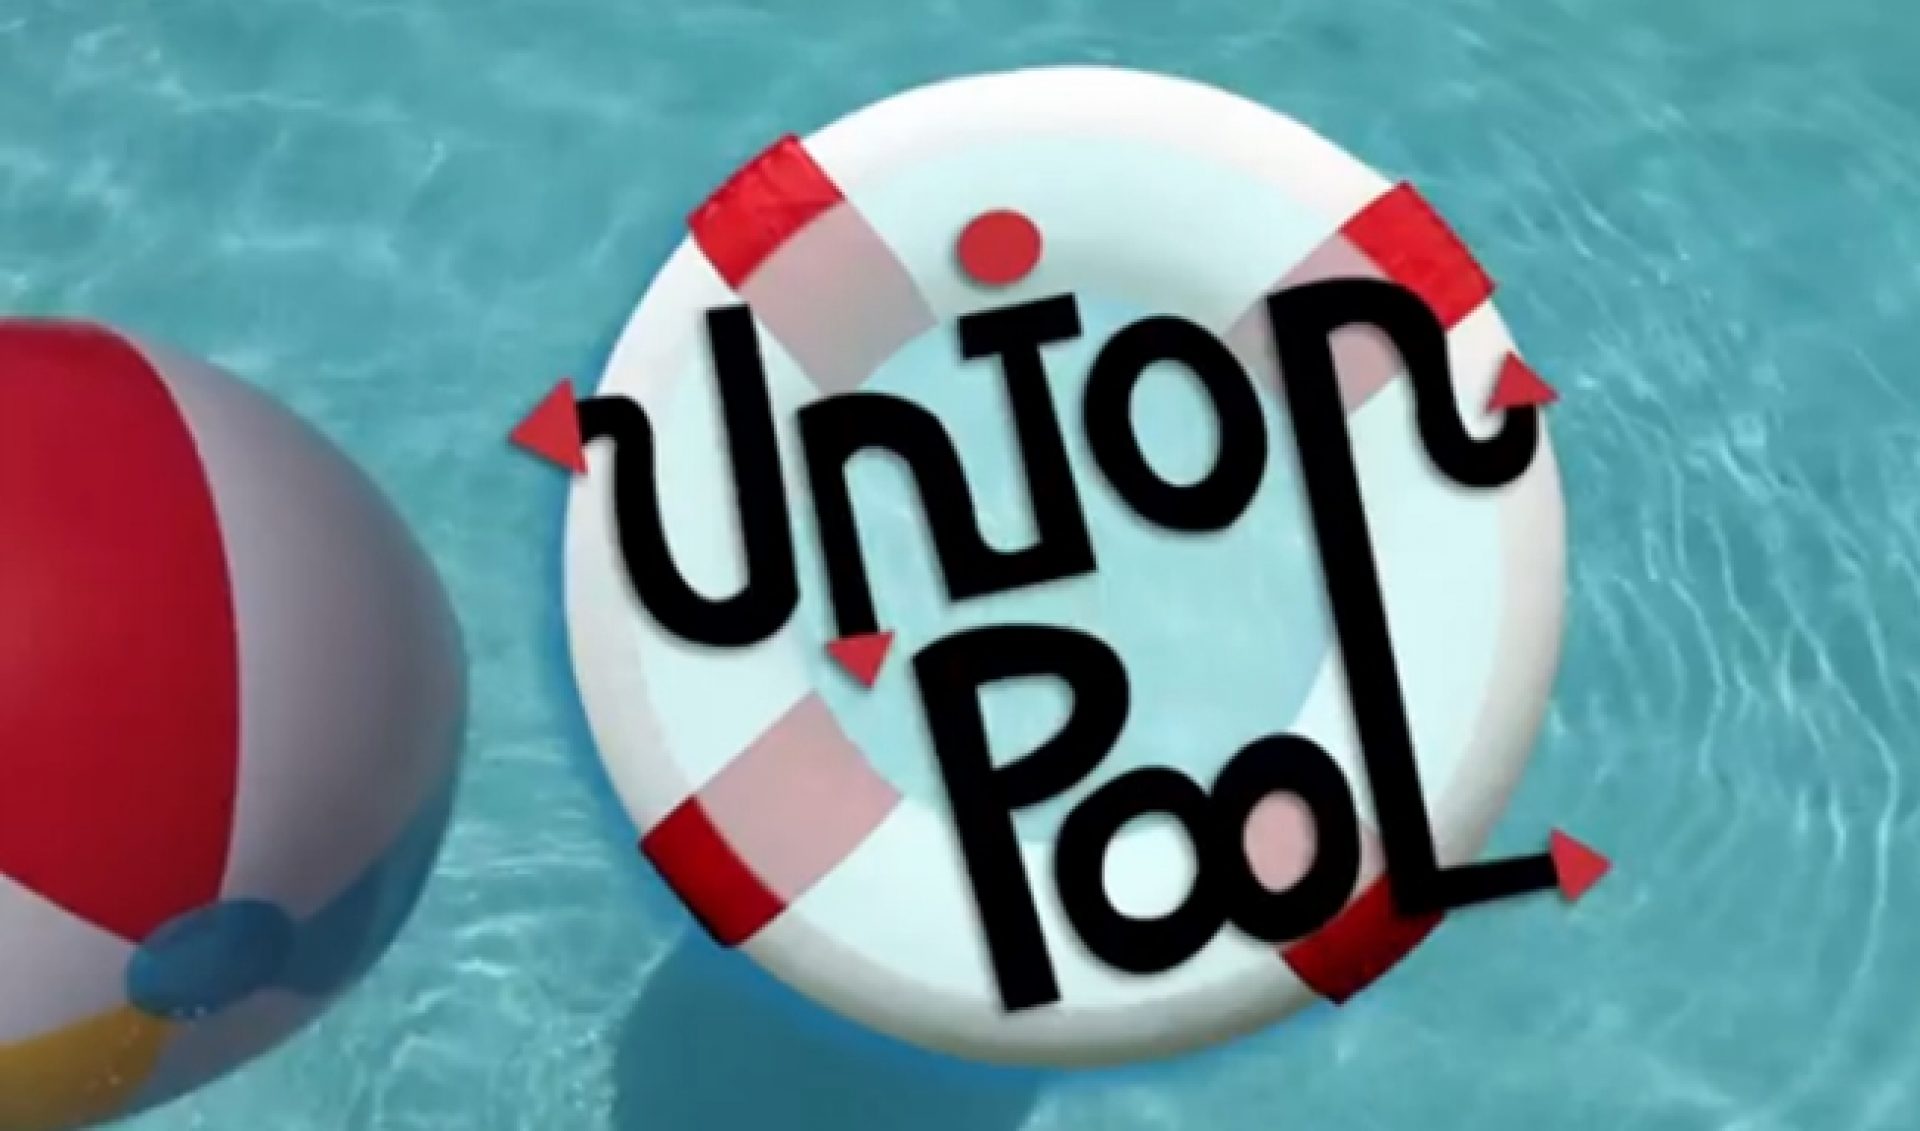 New Starz Comedy Channel Invites Viewers To Hop Into ‘Union Pool’